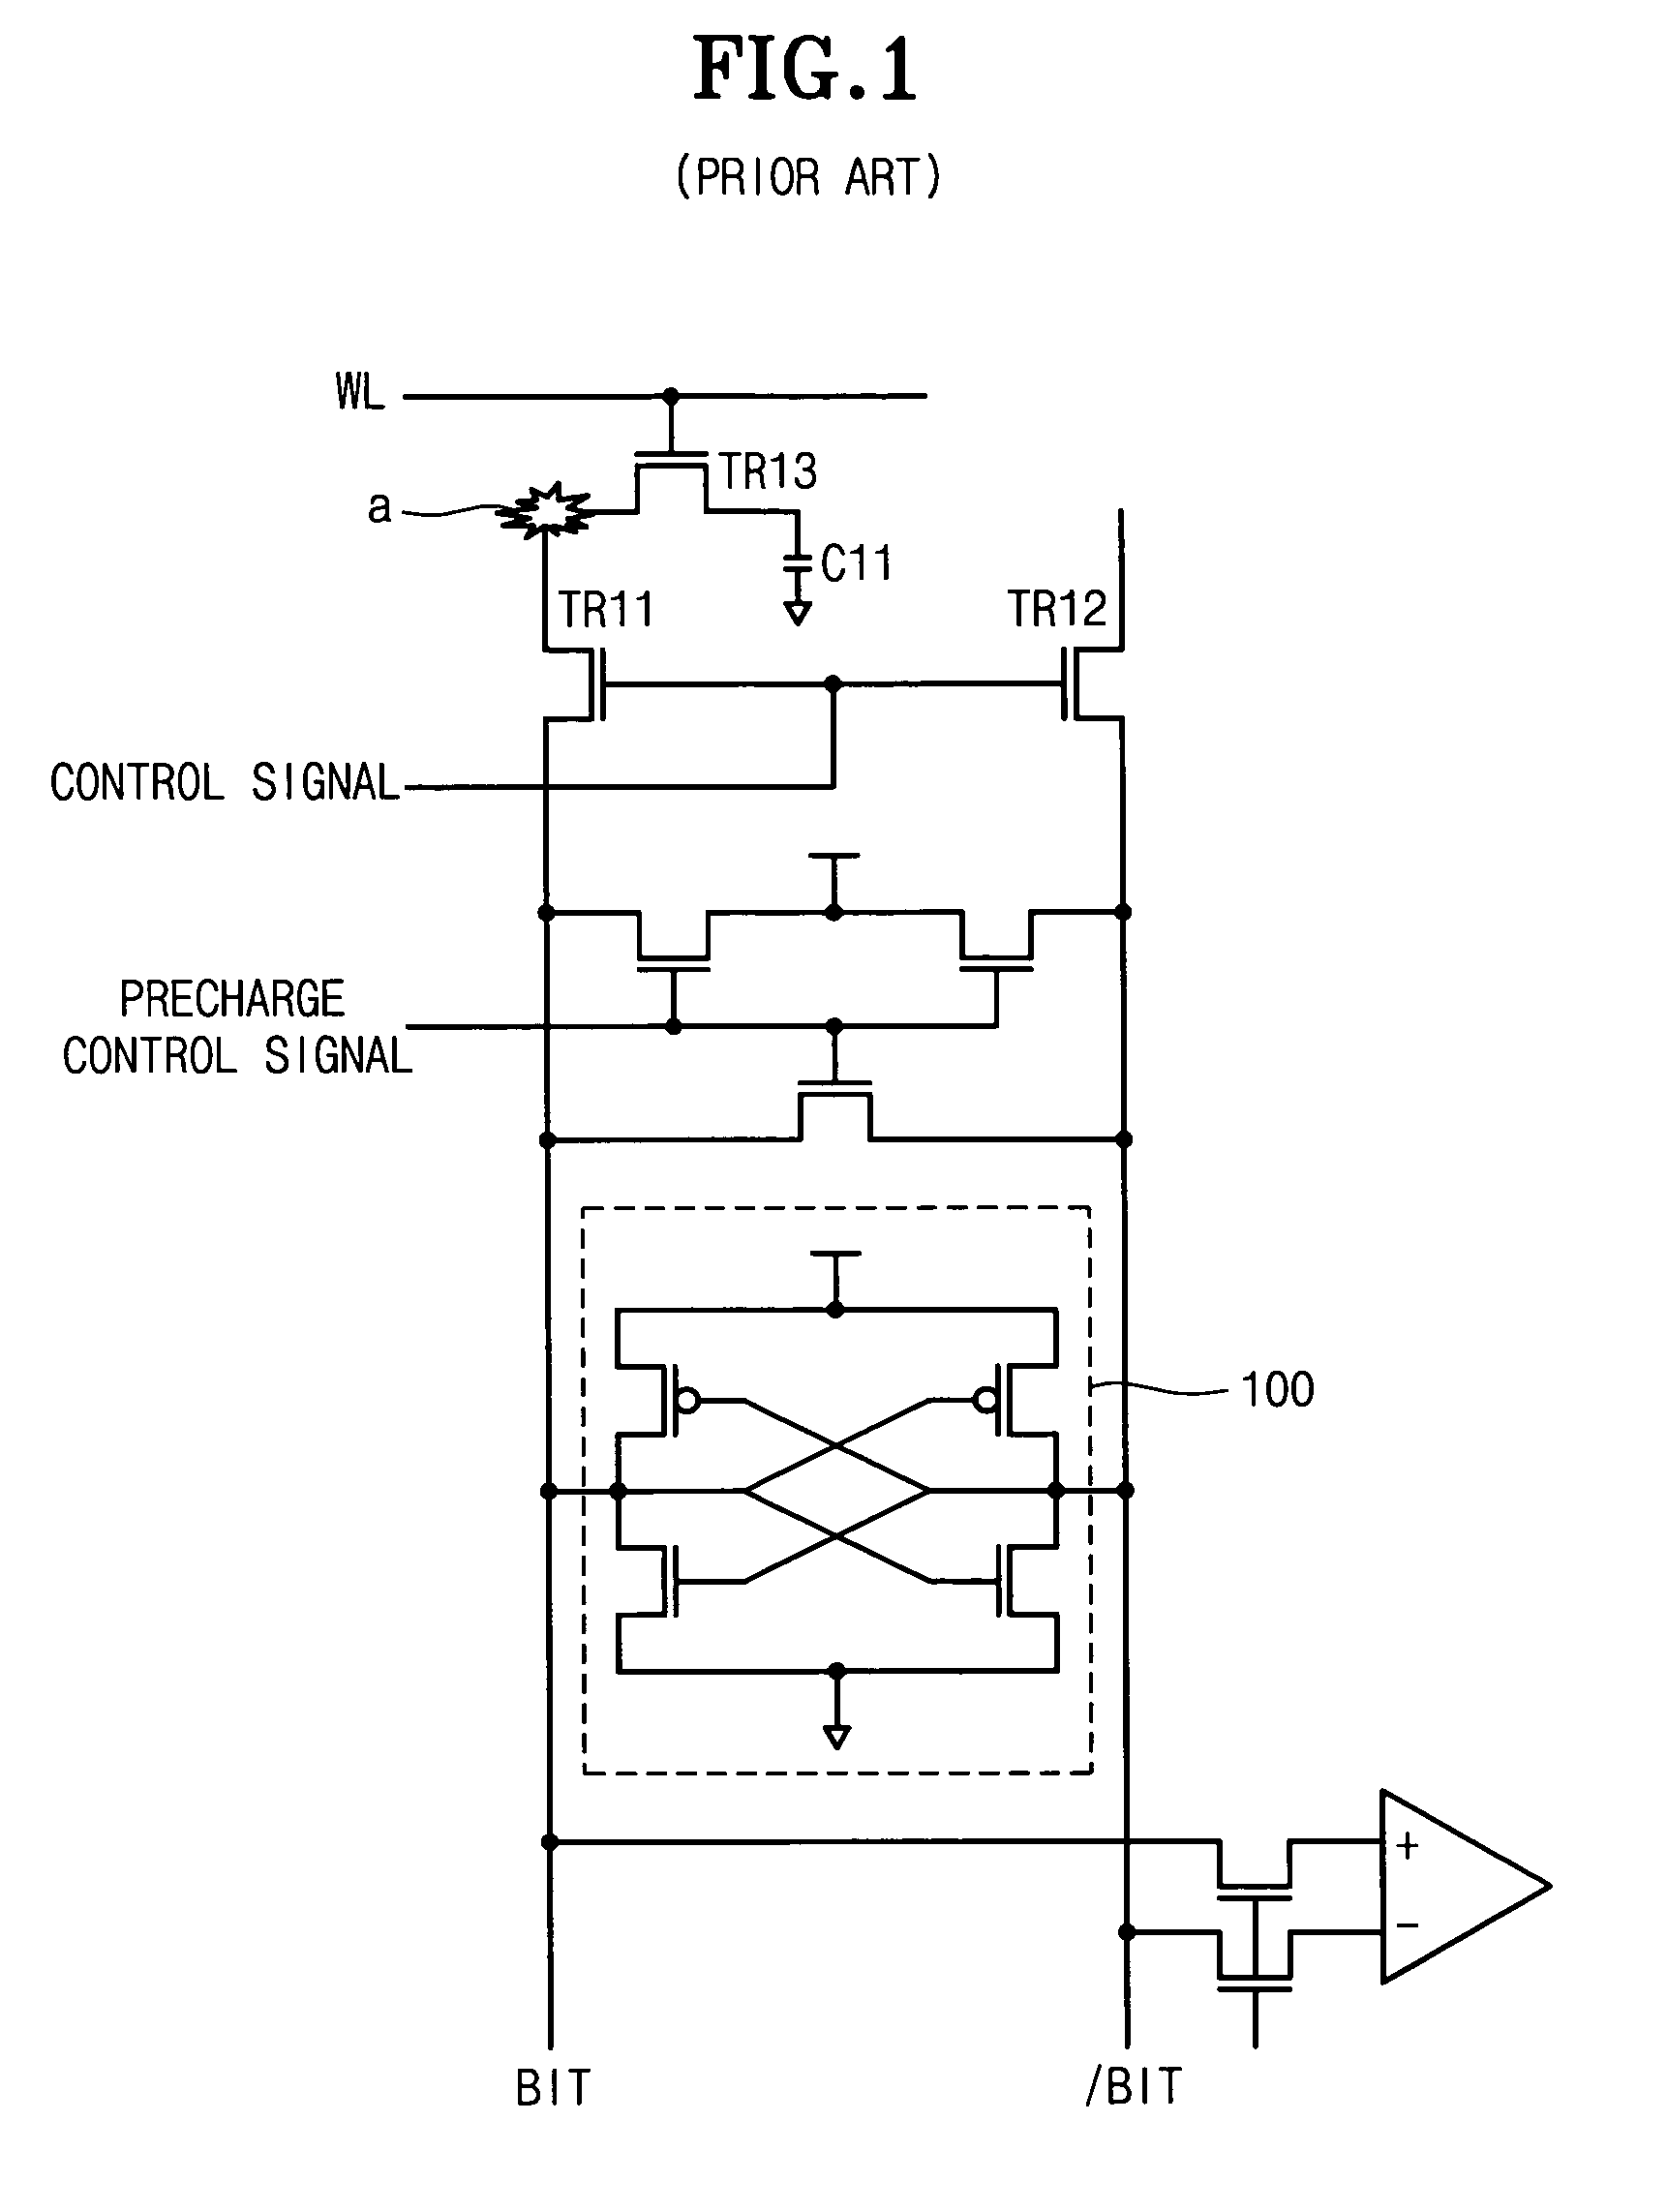 Method for screening failure of memory cell transistor